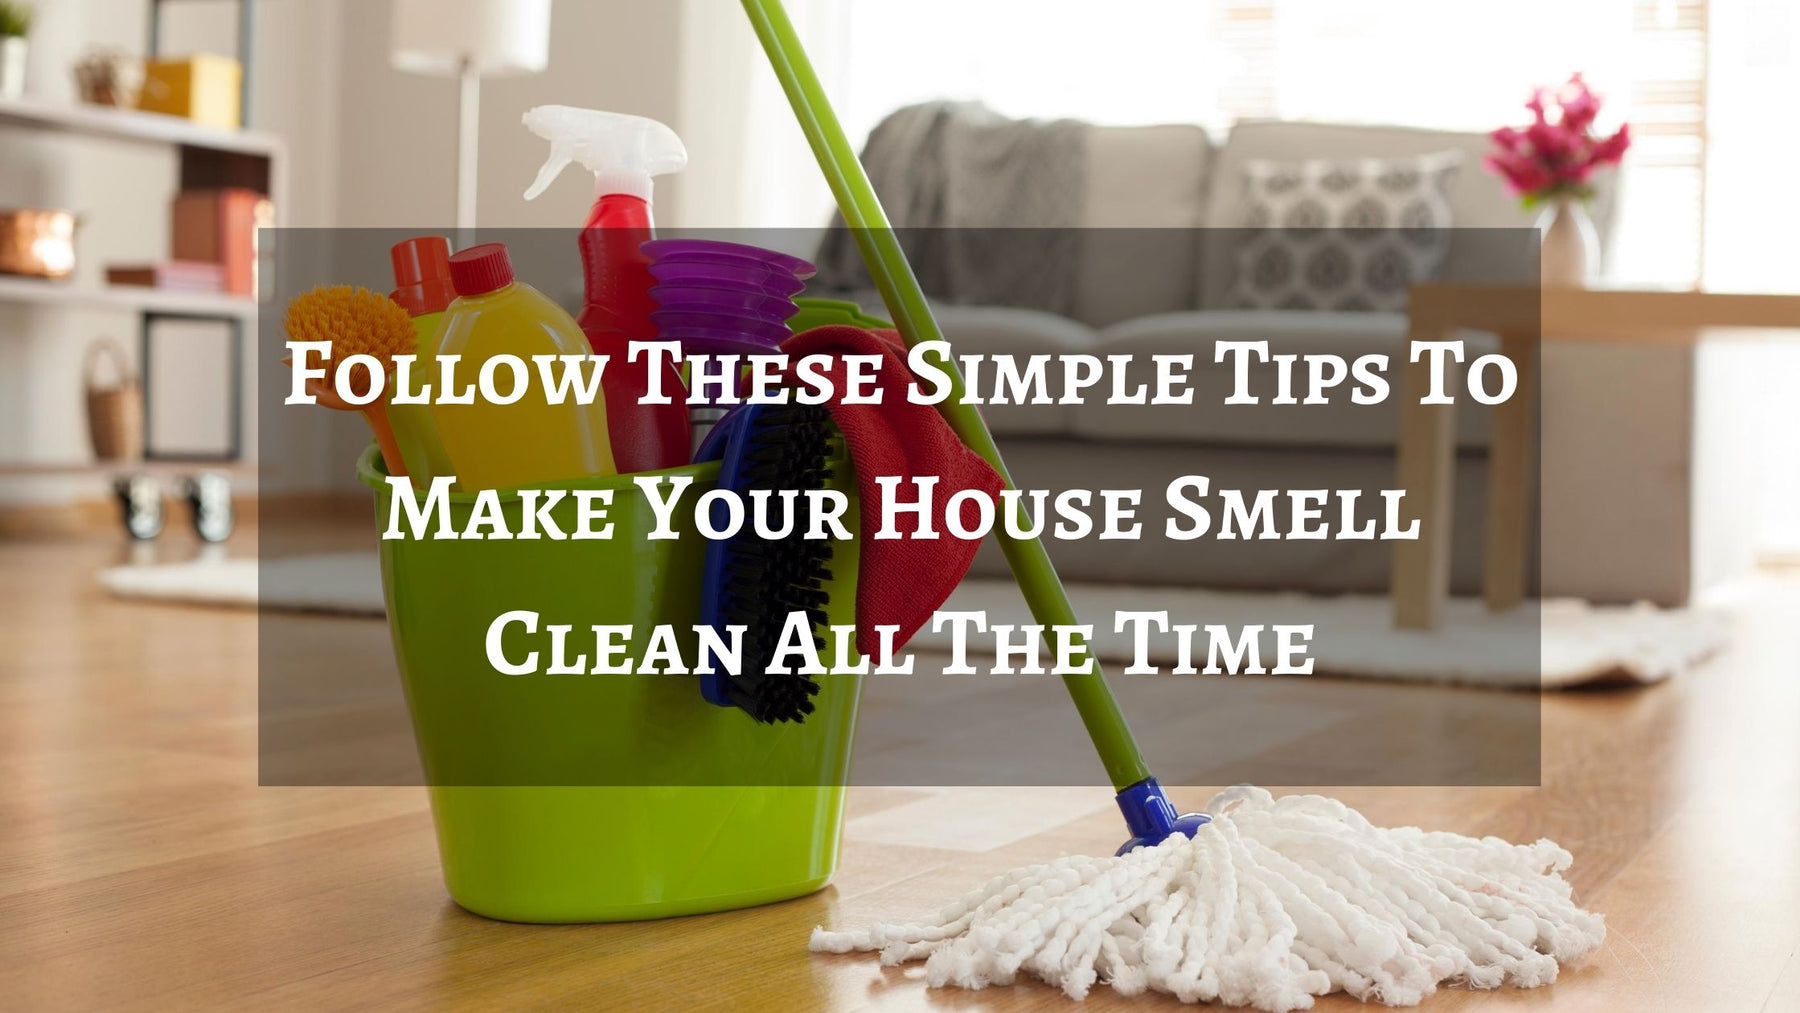 Make house smell clean